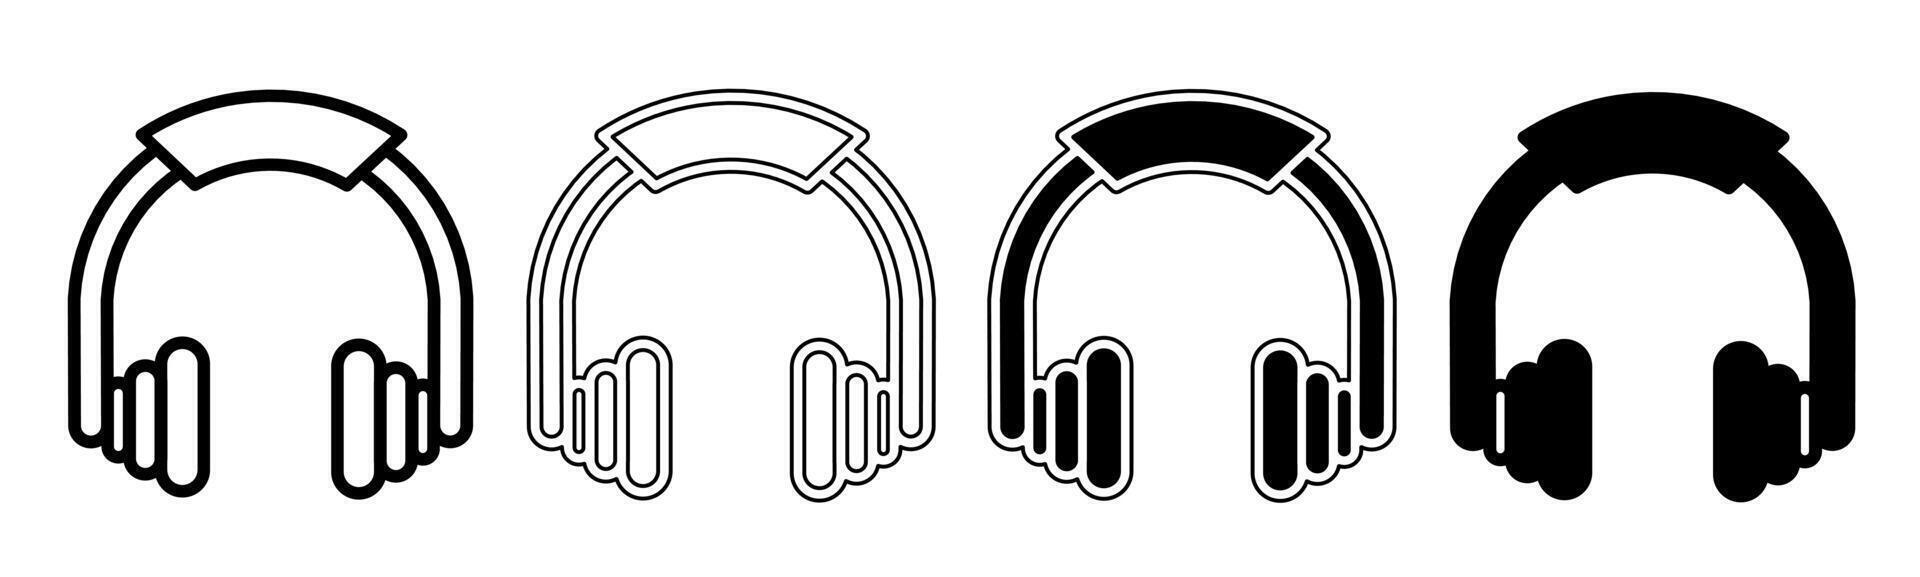 Black and white illustration of a headset. Headset icon collection with line. Stock vector illustration.